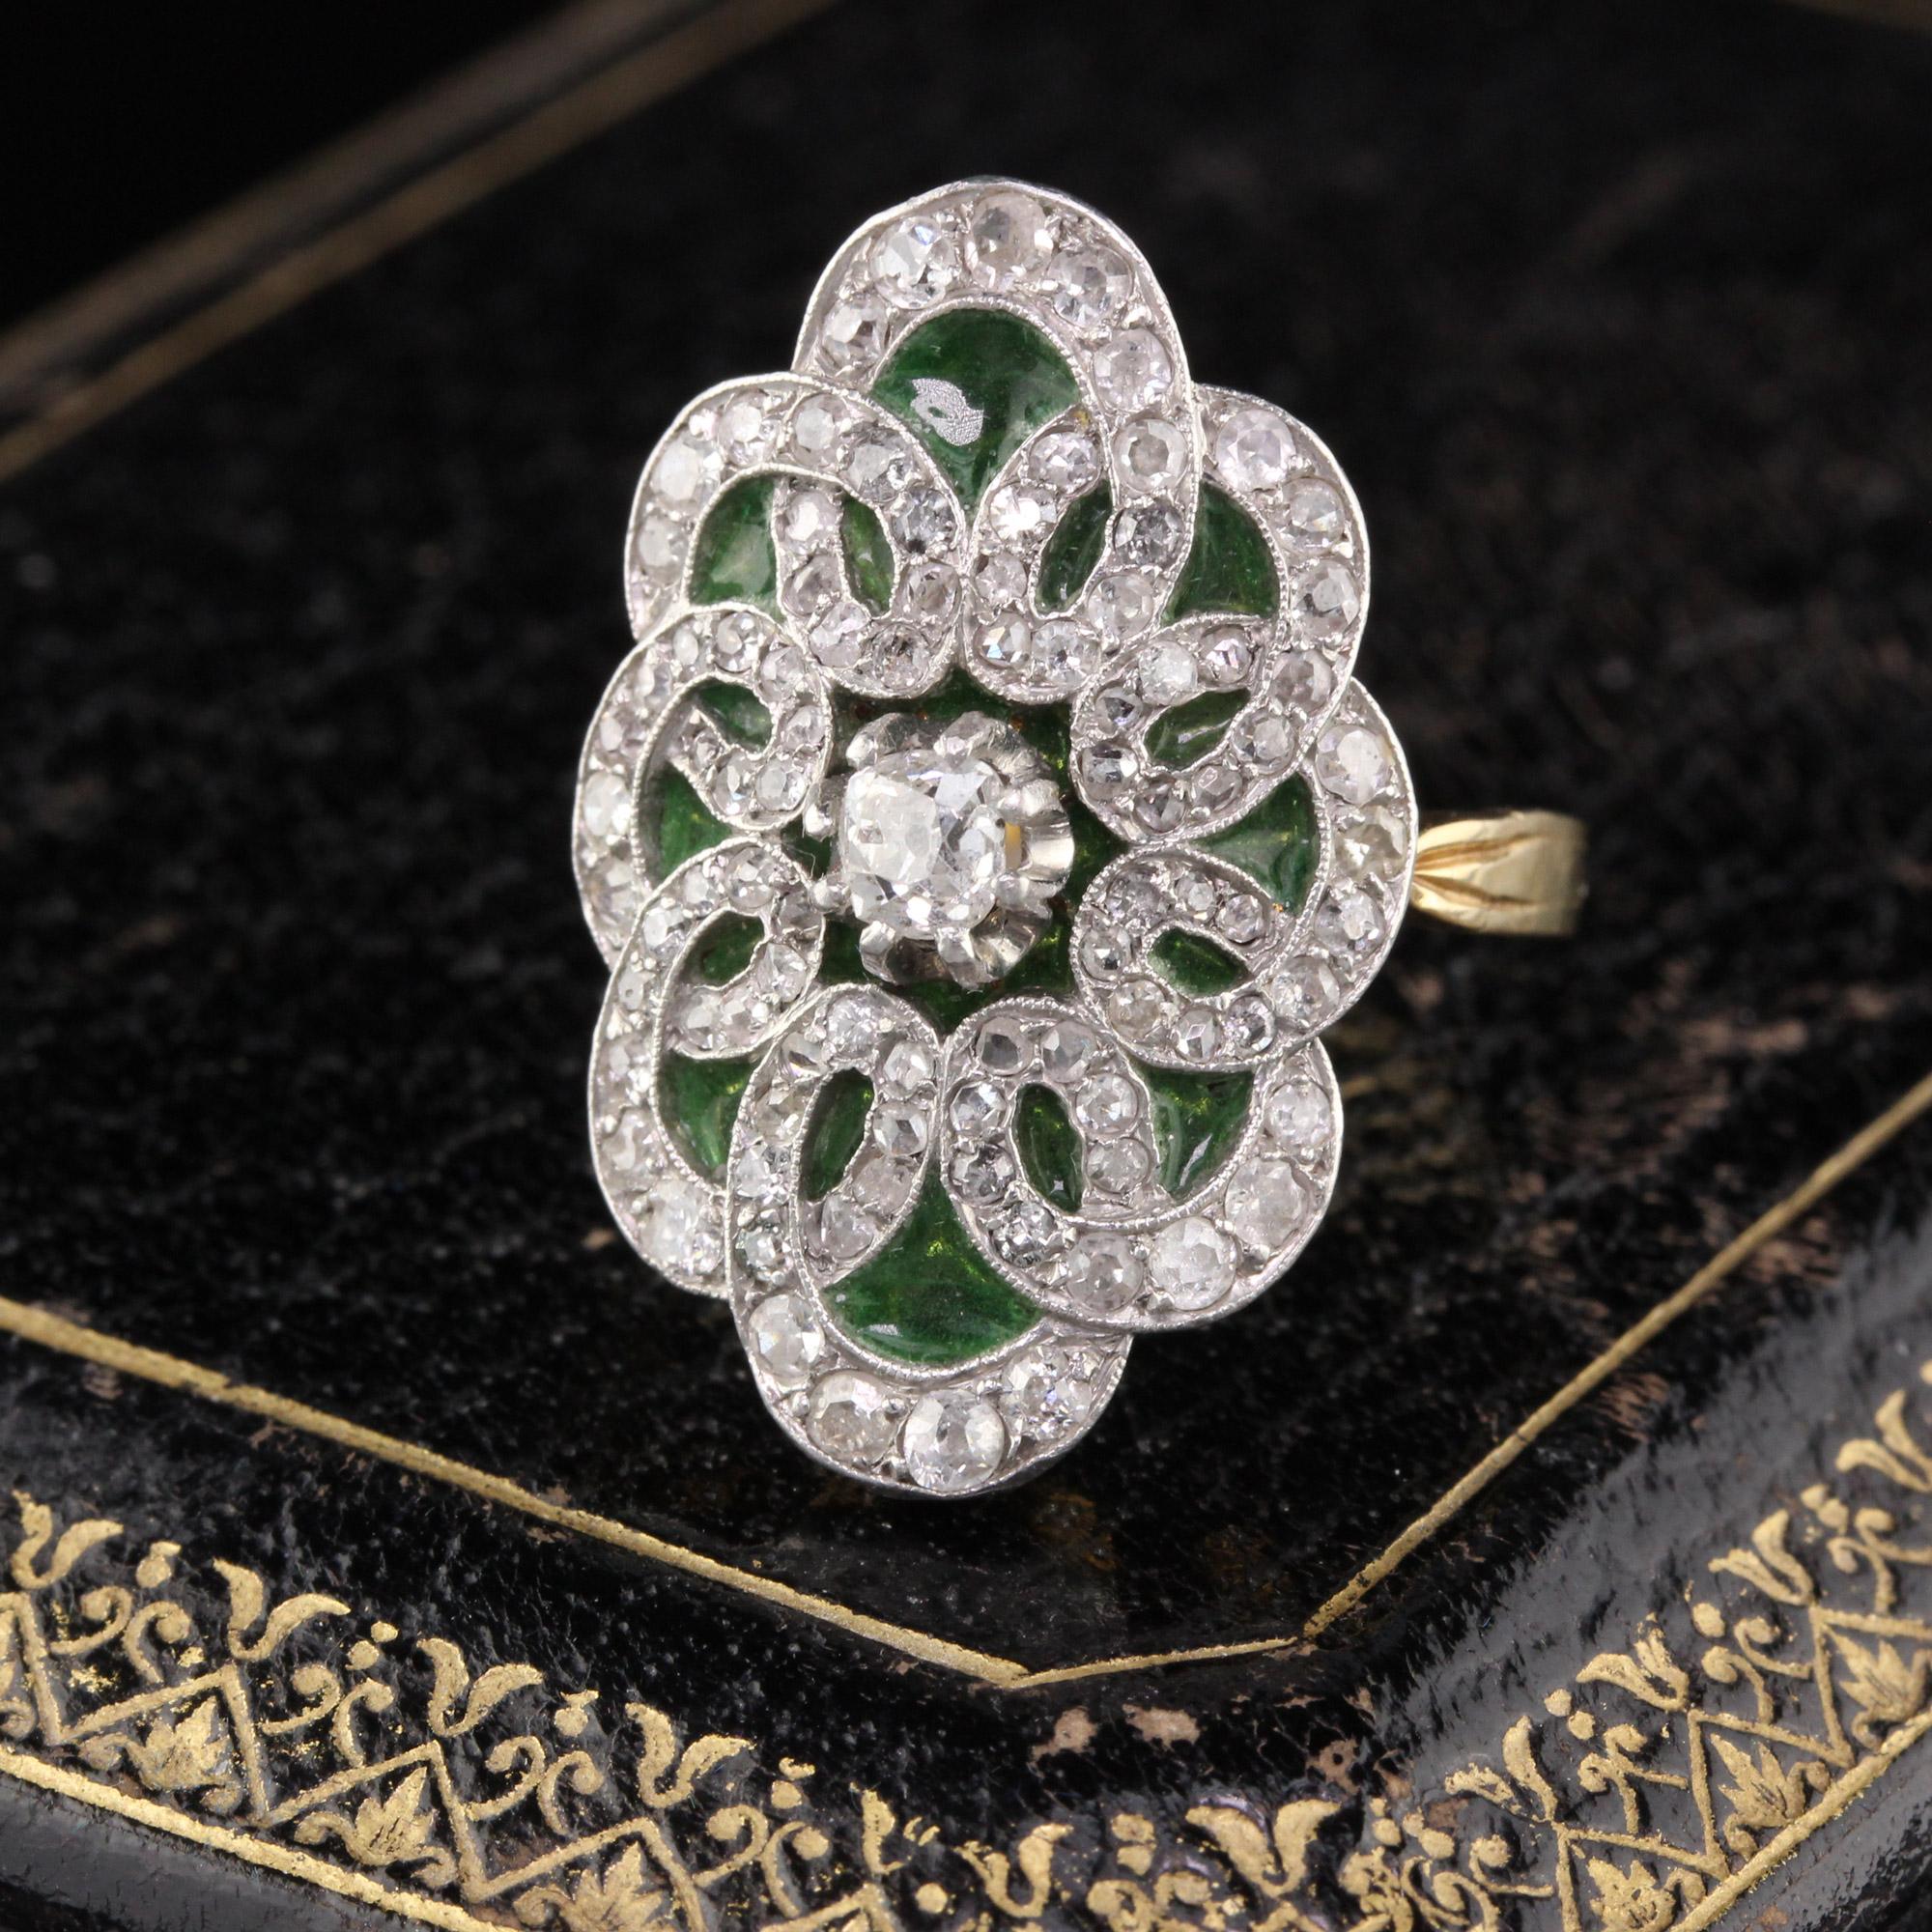 Magnificent Edwardian Shield Ring with an Old Mine Cut Diamond Center, beautiful green plique a jour enamel, and a gorgeous motif. Excellent finger coverage. Can be worn as an engagement ring or cocktail ring. So unique!

#R0240

Metal: 18K Yellow